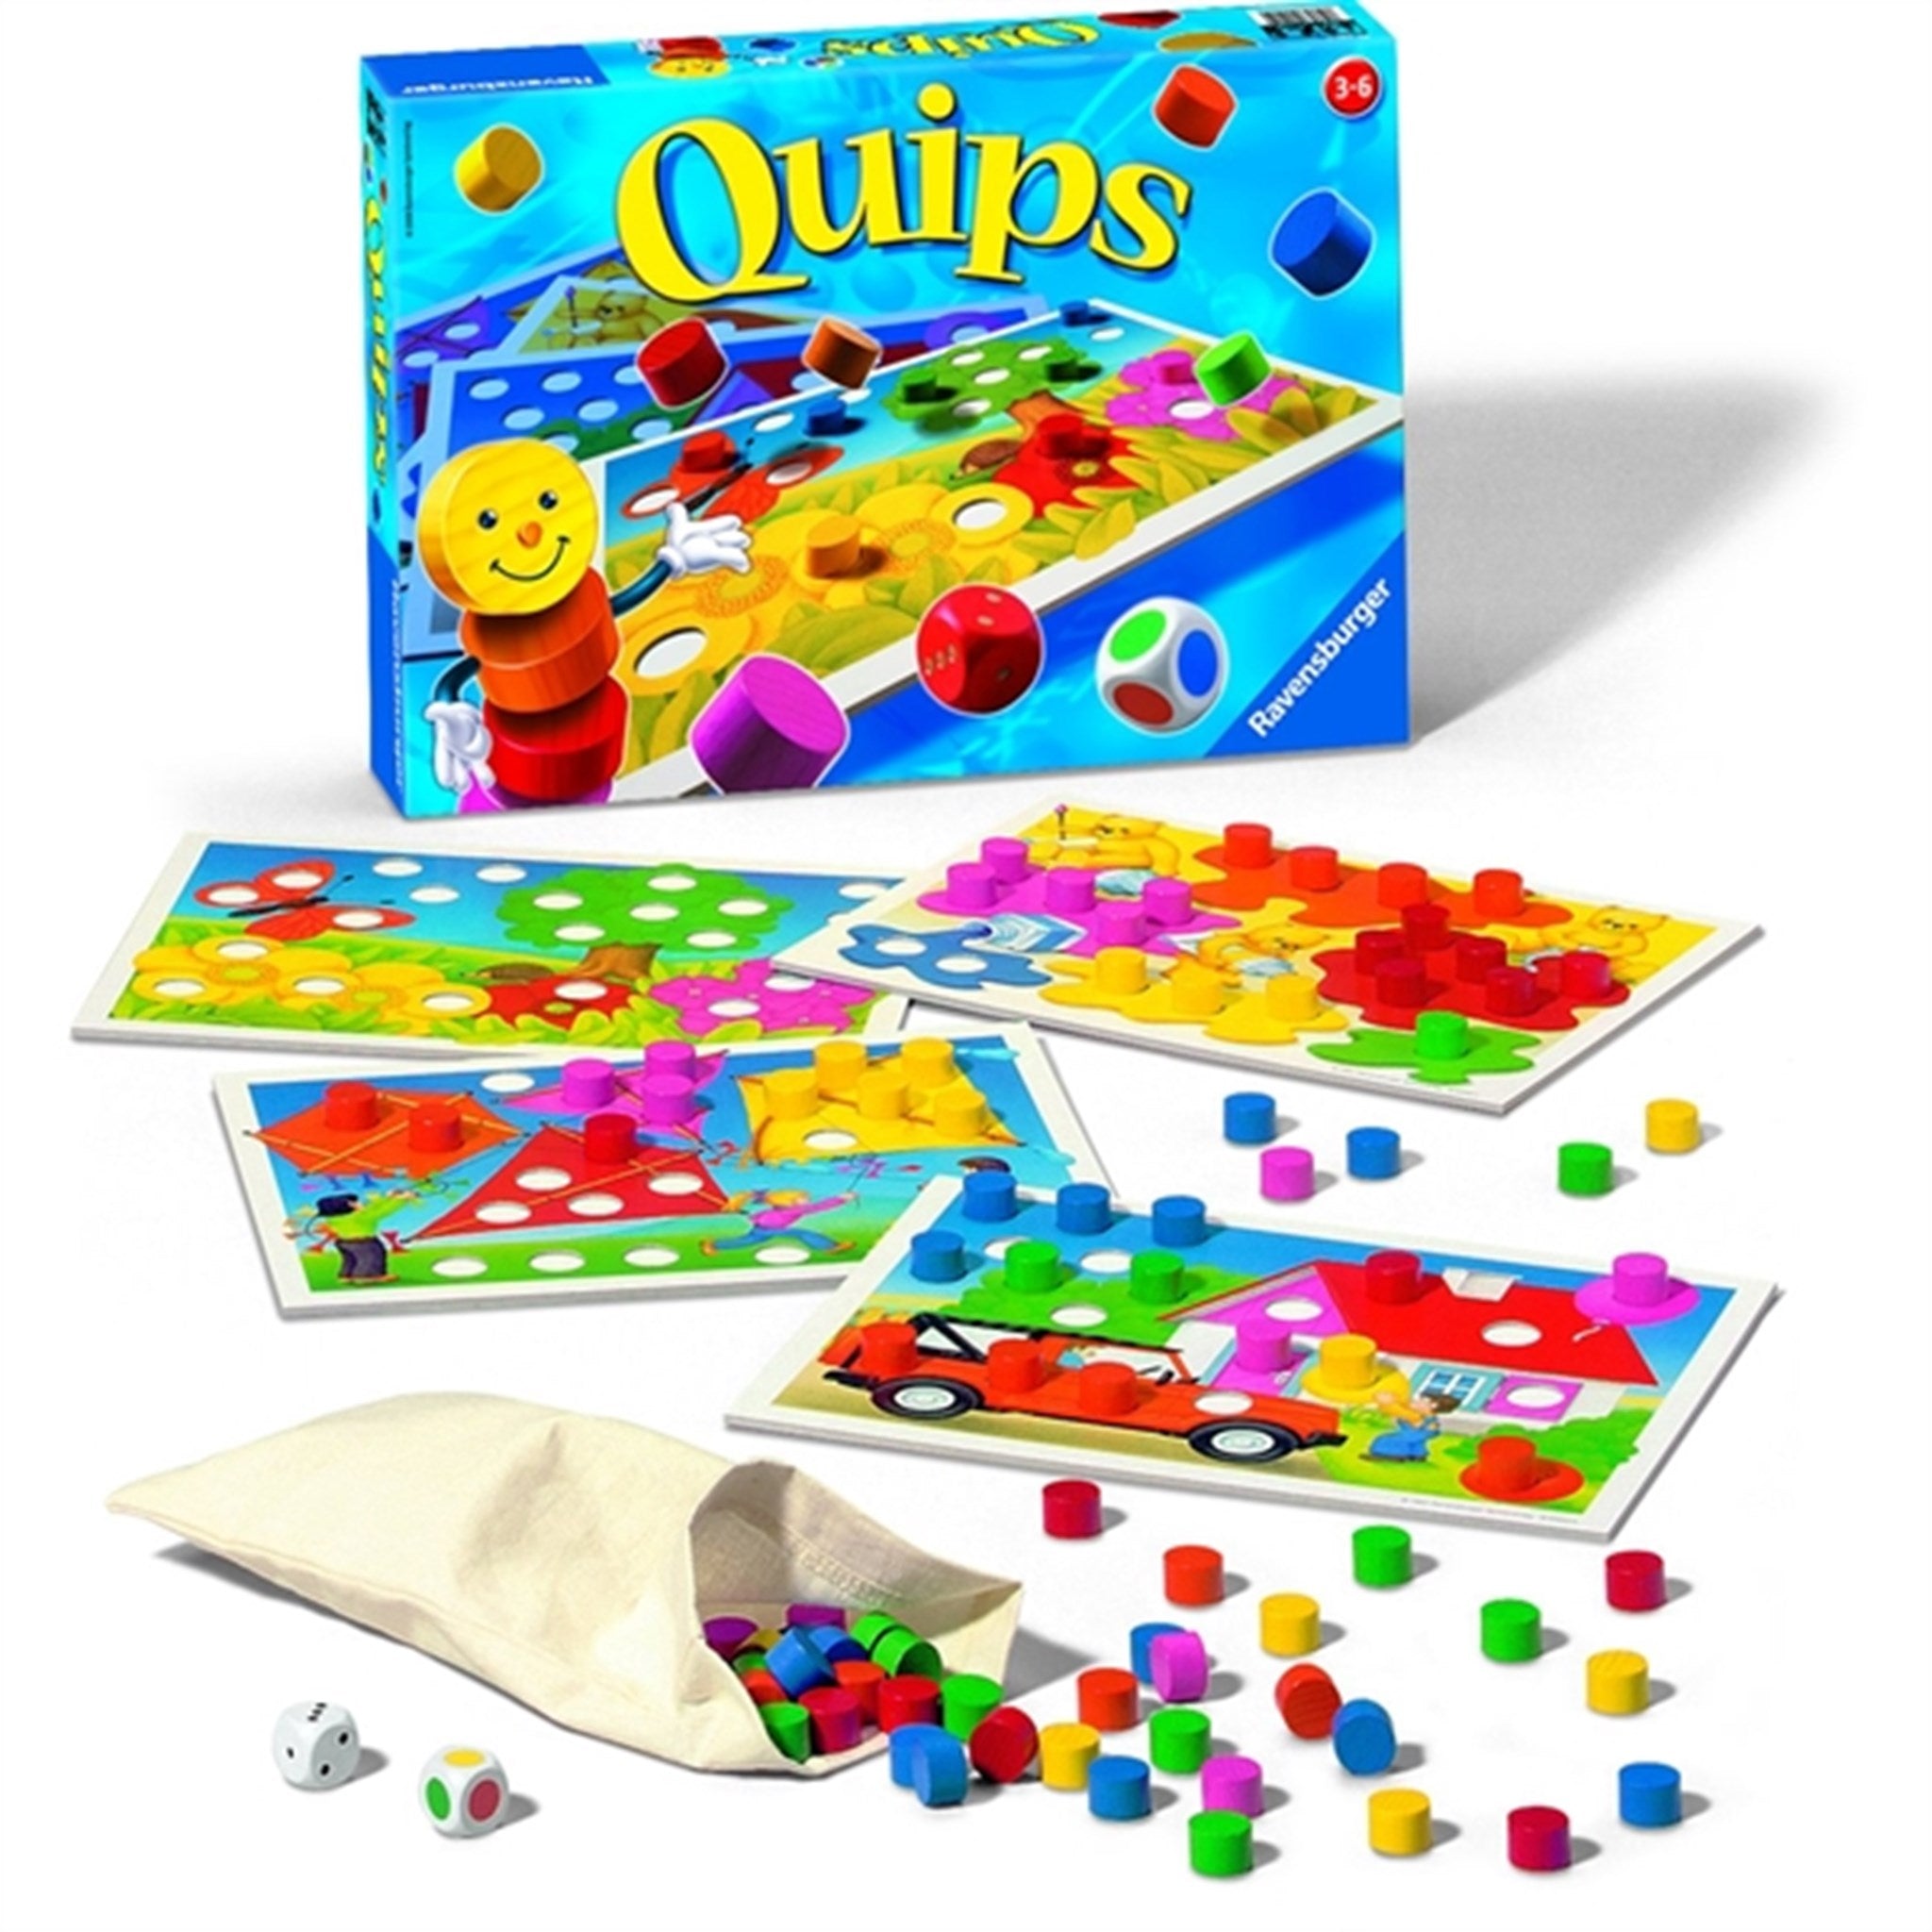 Ravensburger Quips Board Game 2